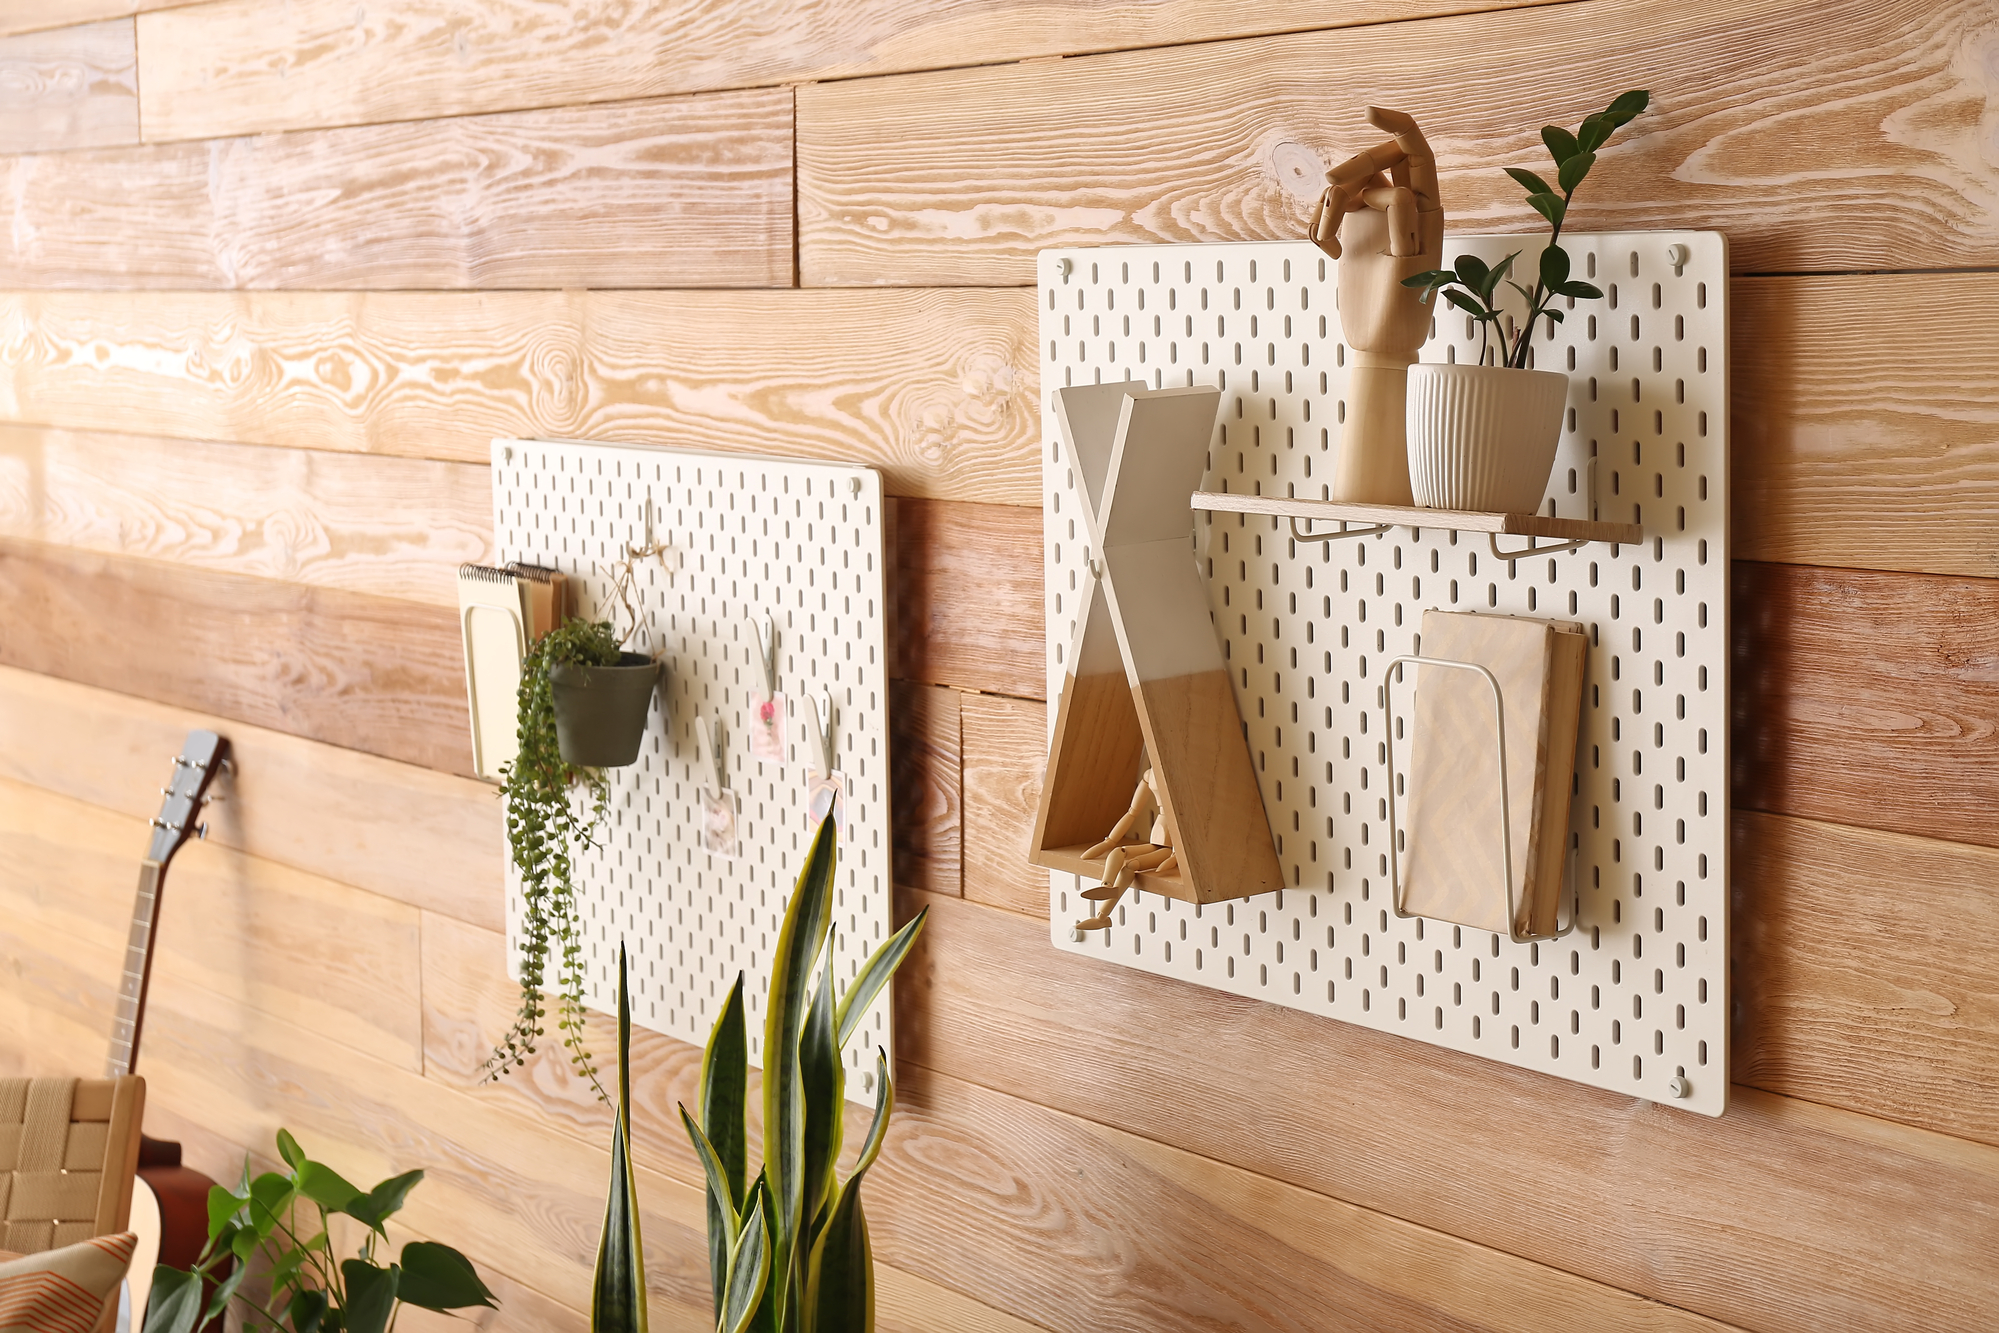 Pegboards with decor on wooden wall in room